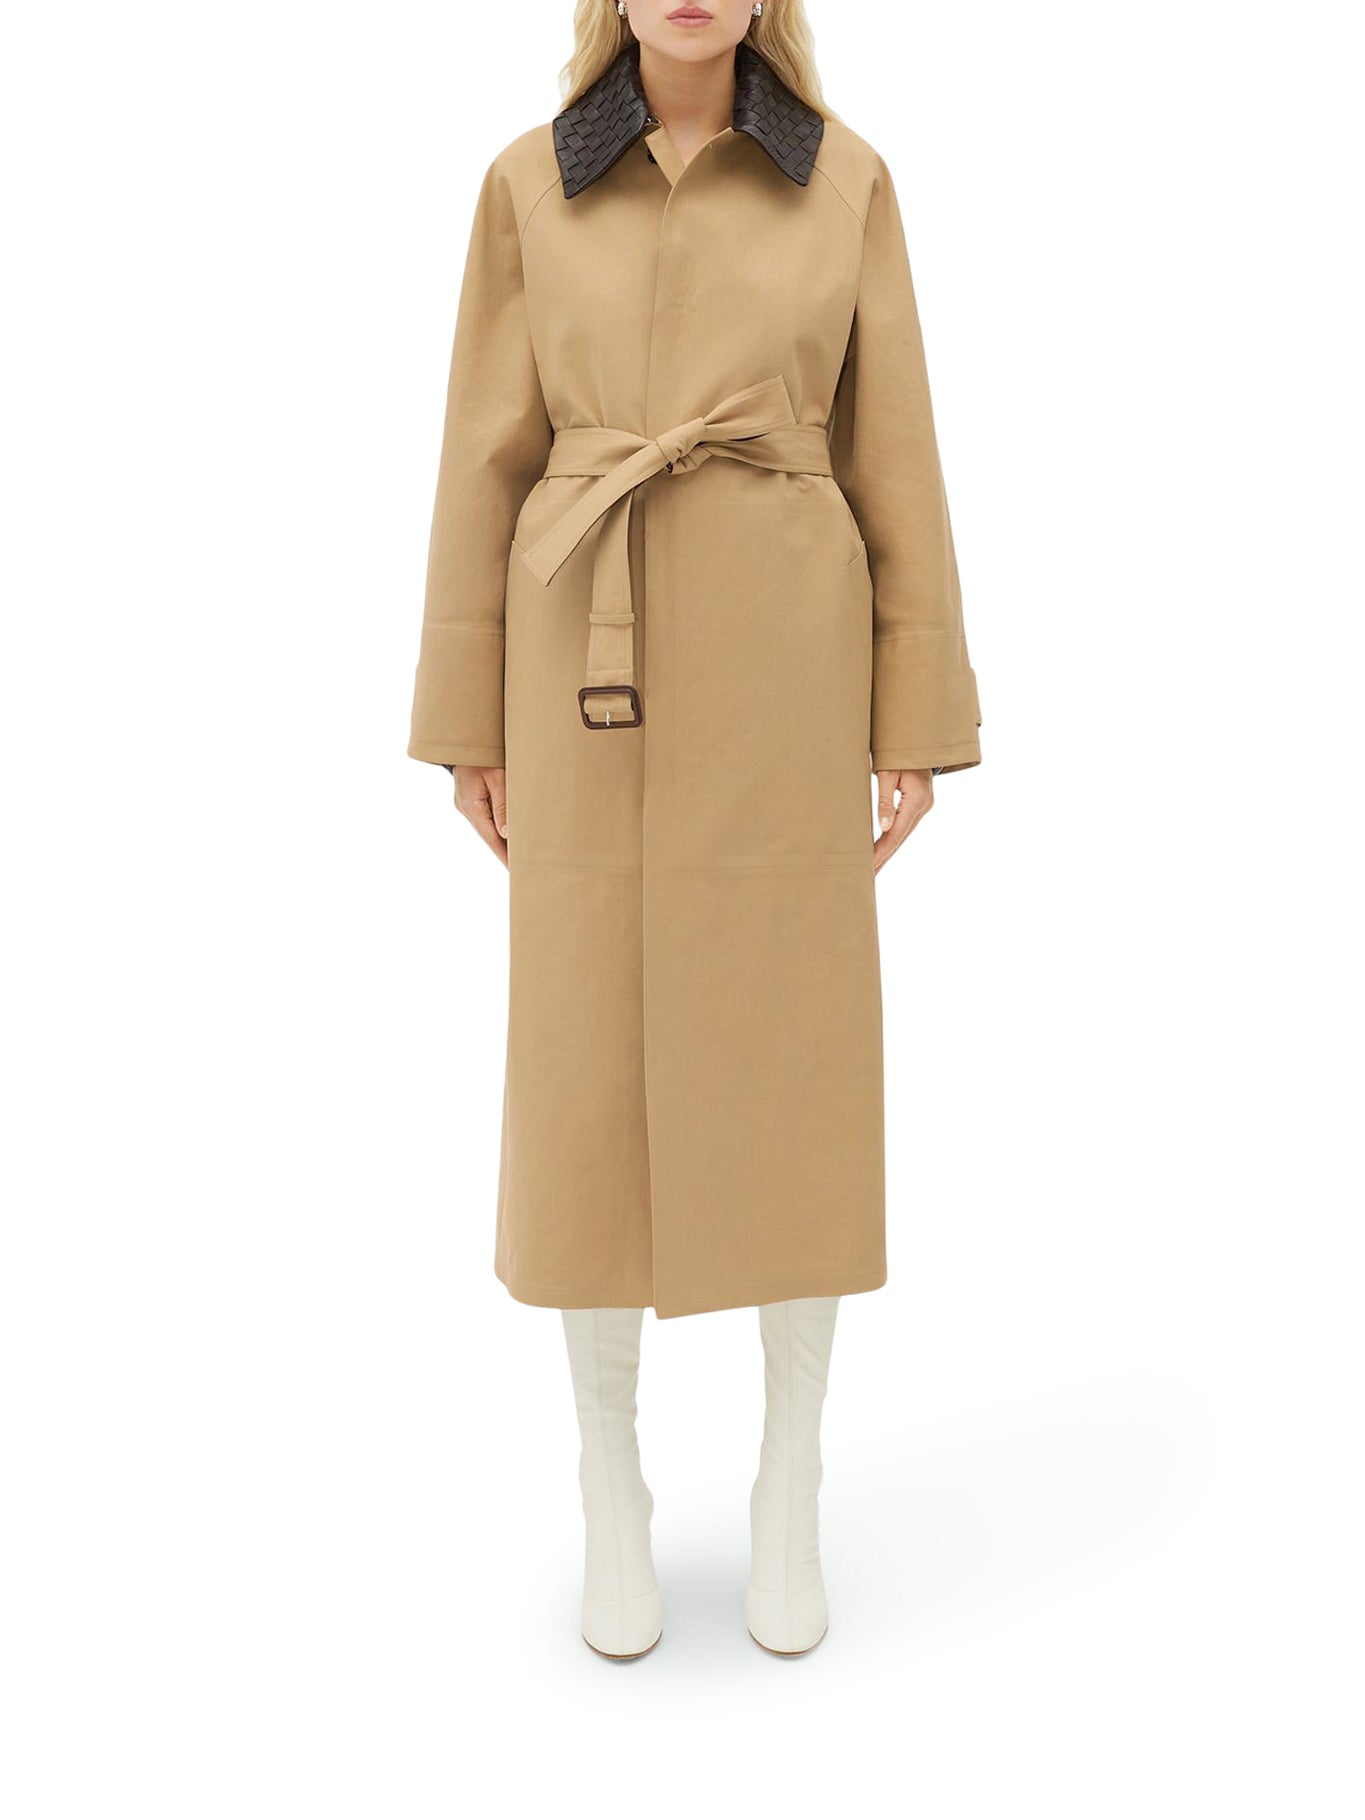 Cotton trench coat with braided collar